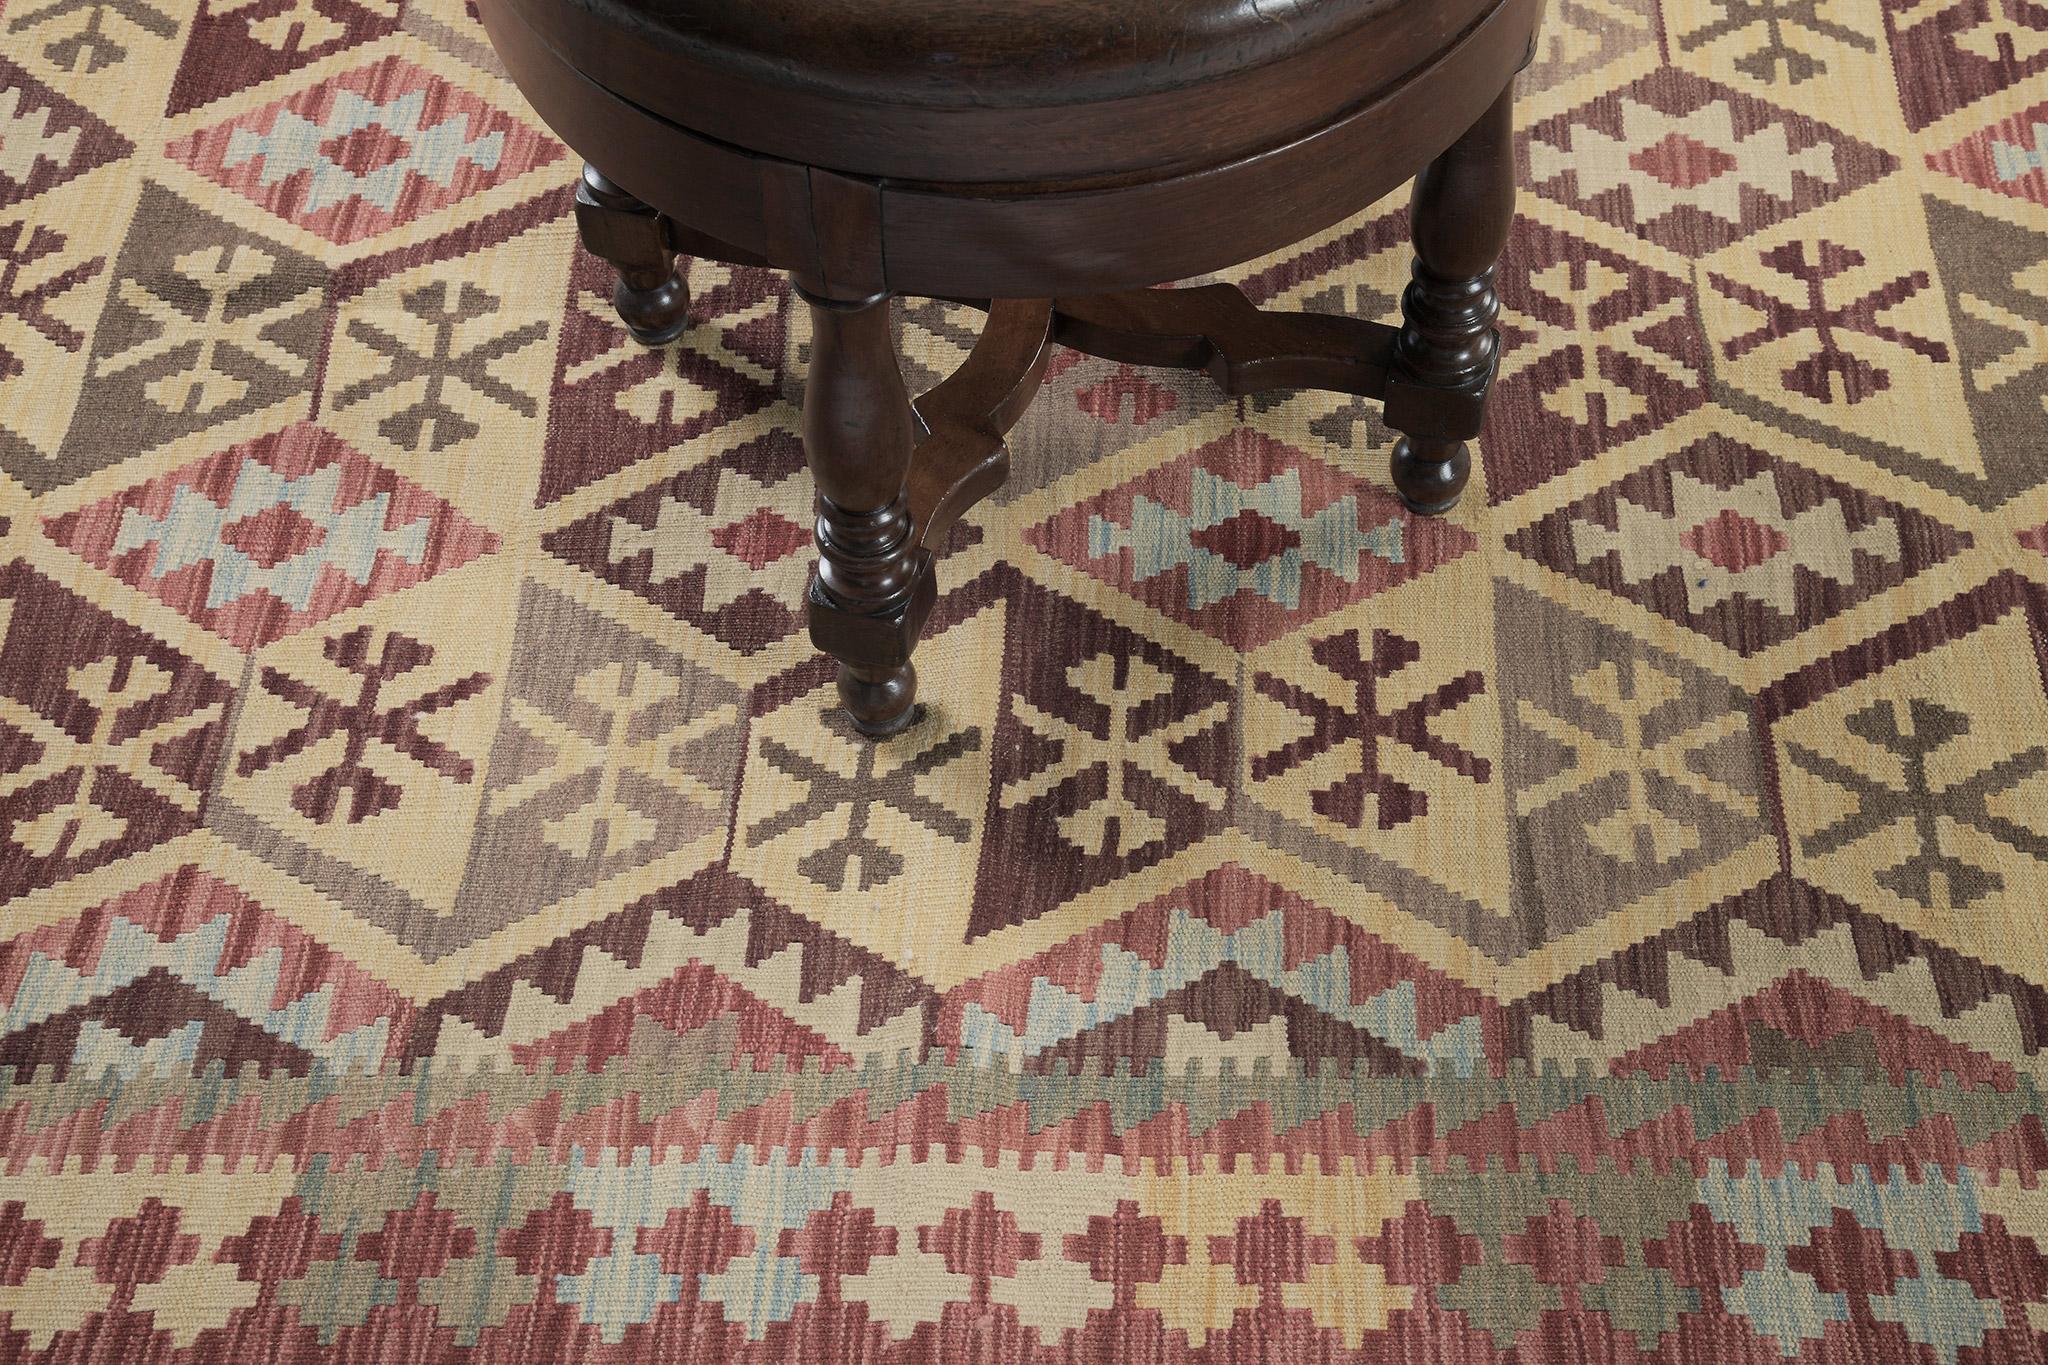 These tribal patterns create a promising and striking design for a variety of interiors. This incredible vintage-styled flatweave Kilim features geometrical tribal motifs and symbols through panel design of multi-colored palettes. A masterpiece that